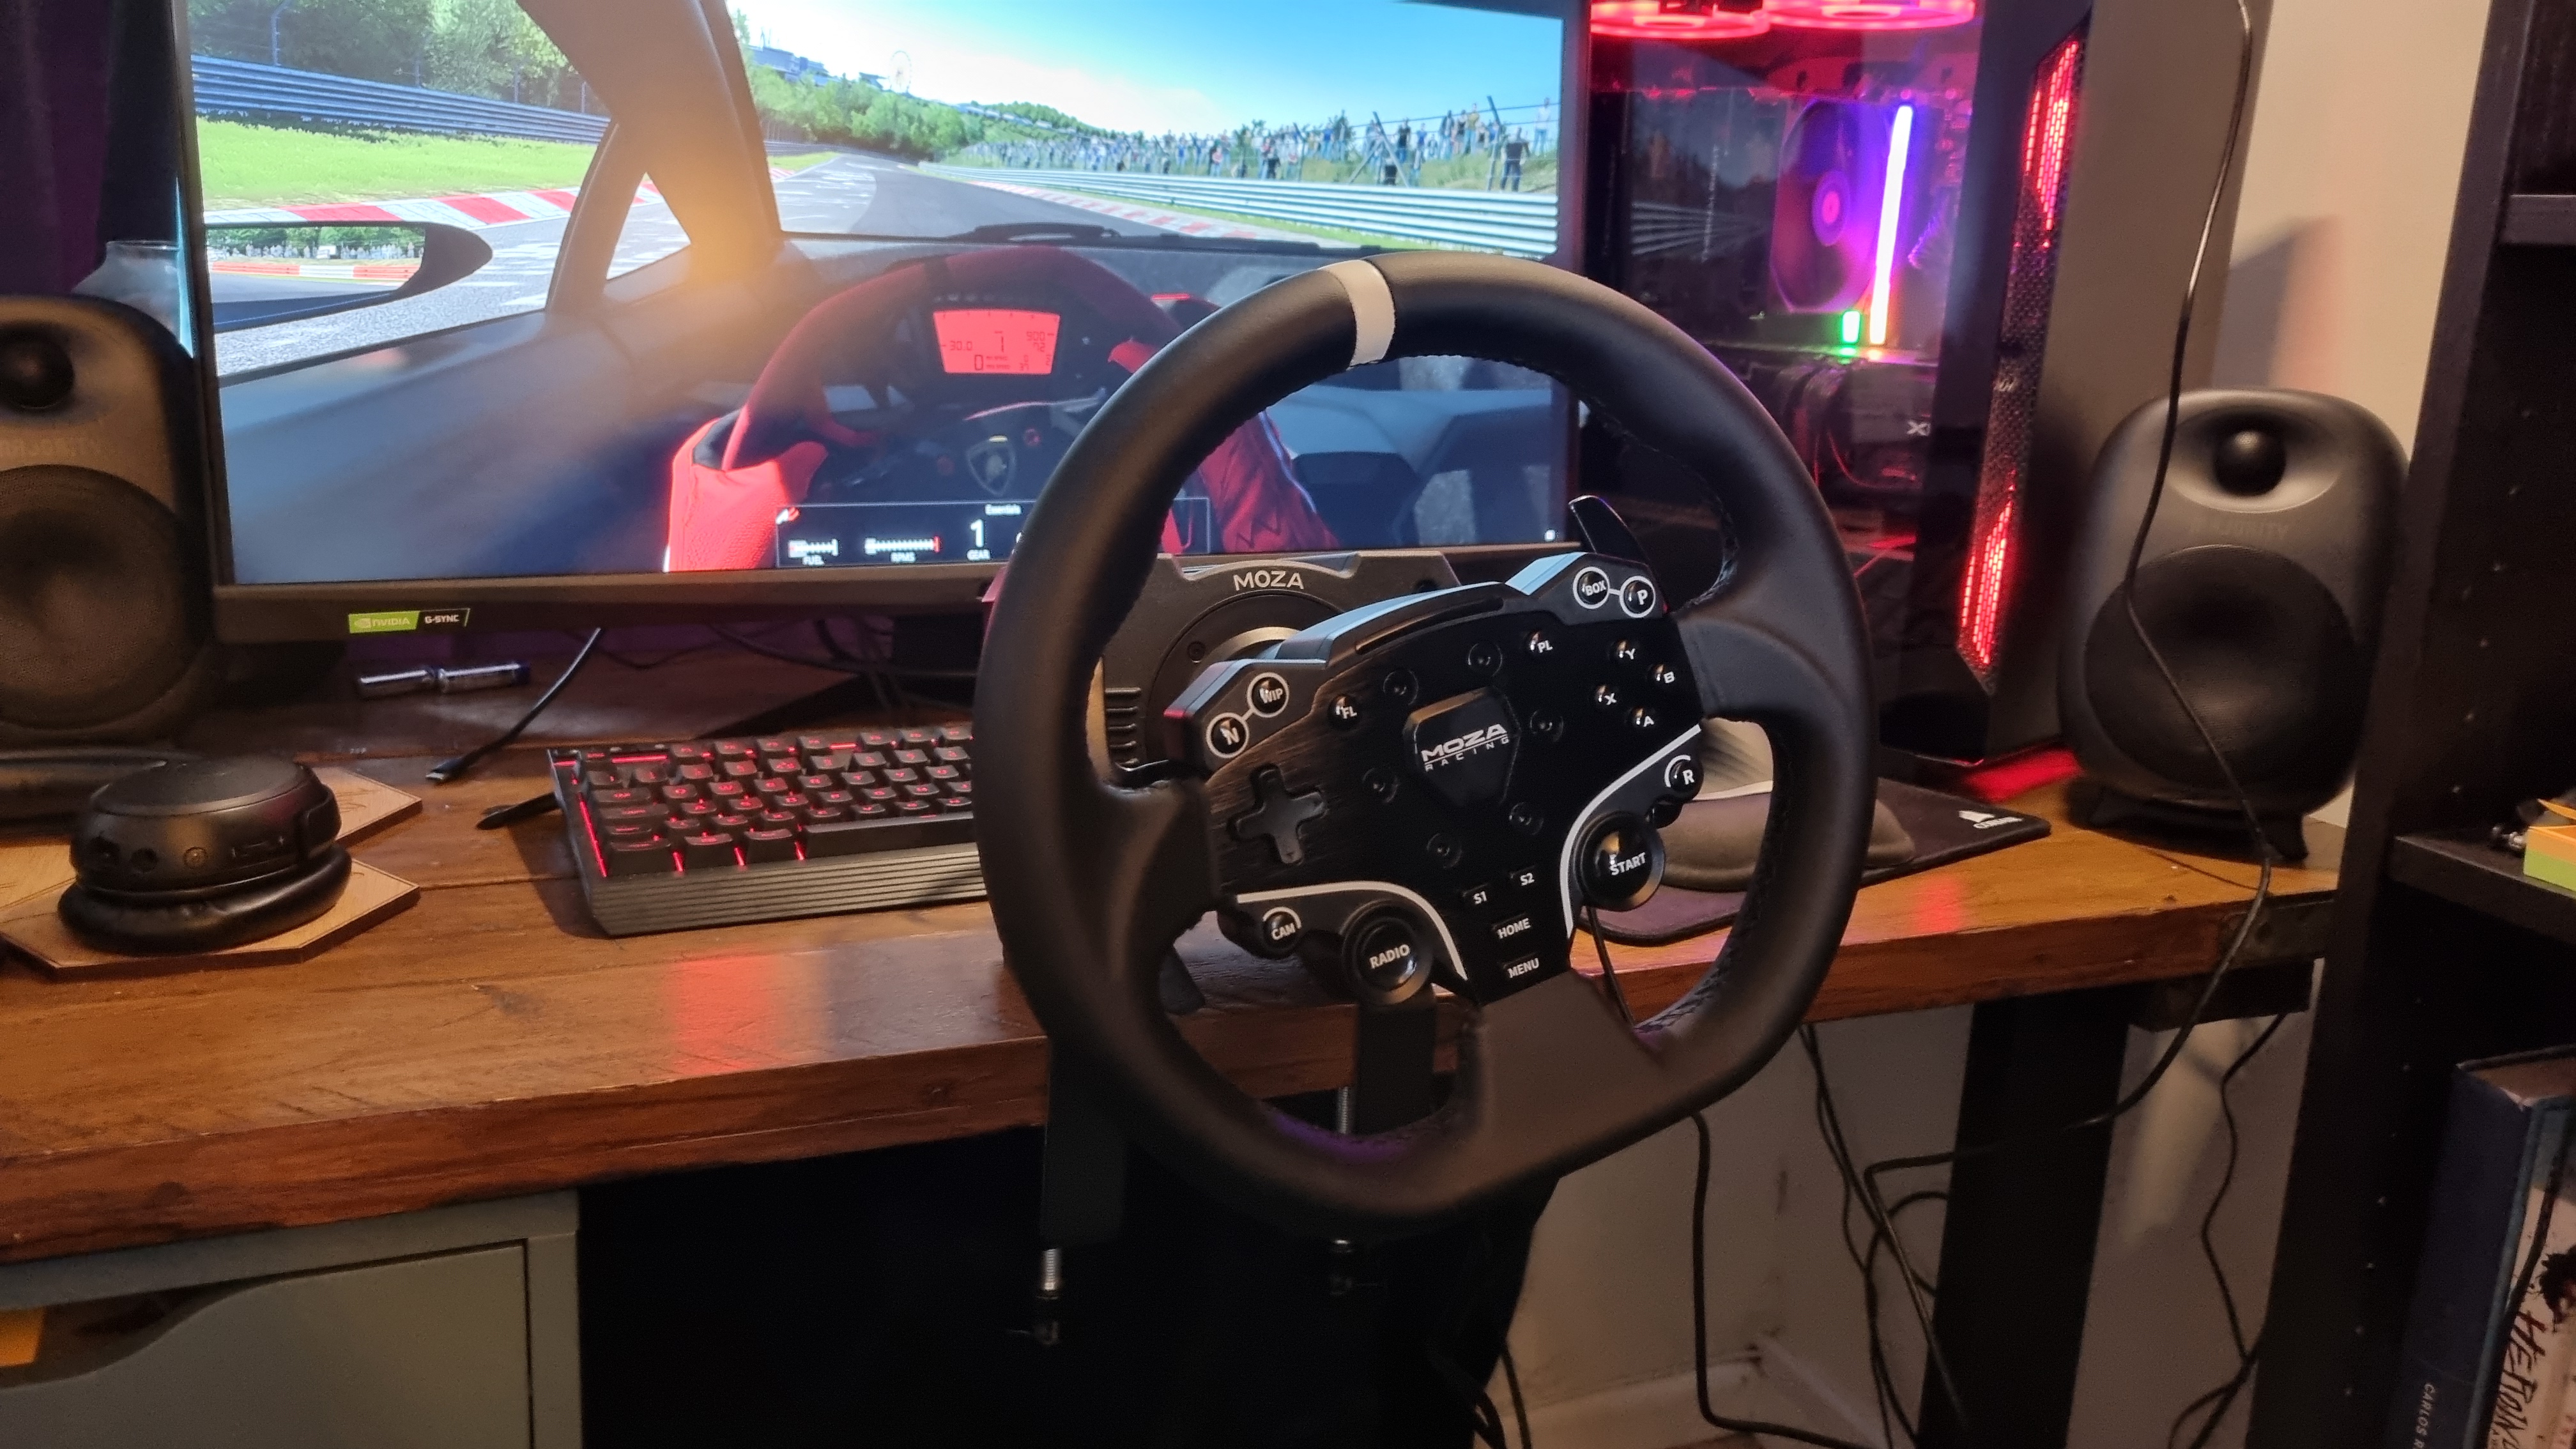 The MOZA R5 wheelbase mounted to a wooden desk with desk clamps, with a monitor and gaming rig showing a Lamborghini in Assetto Corsa at the Nürburgring